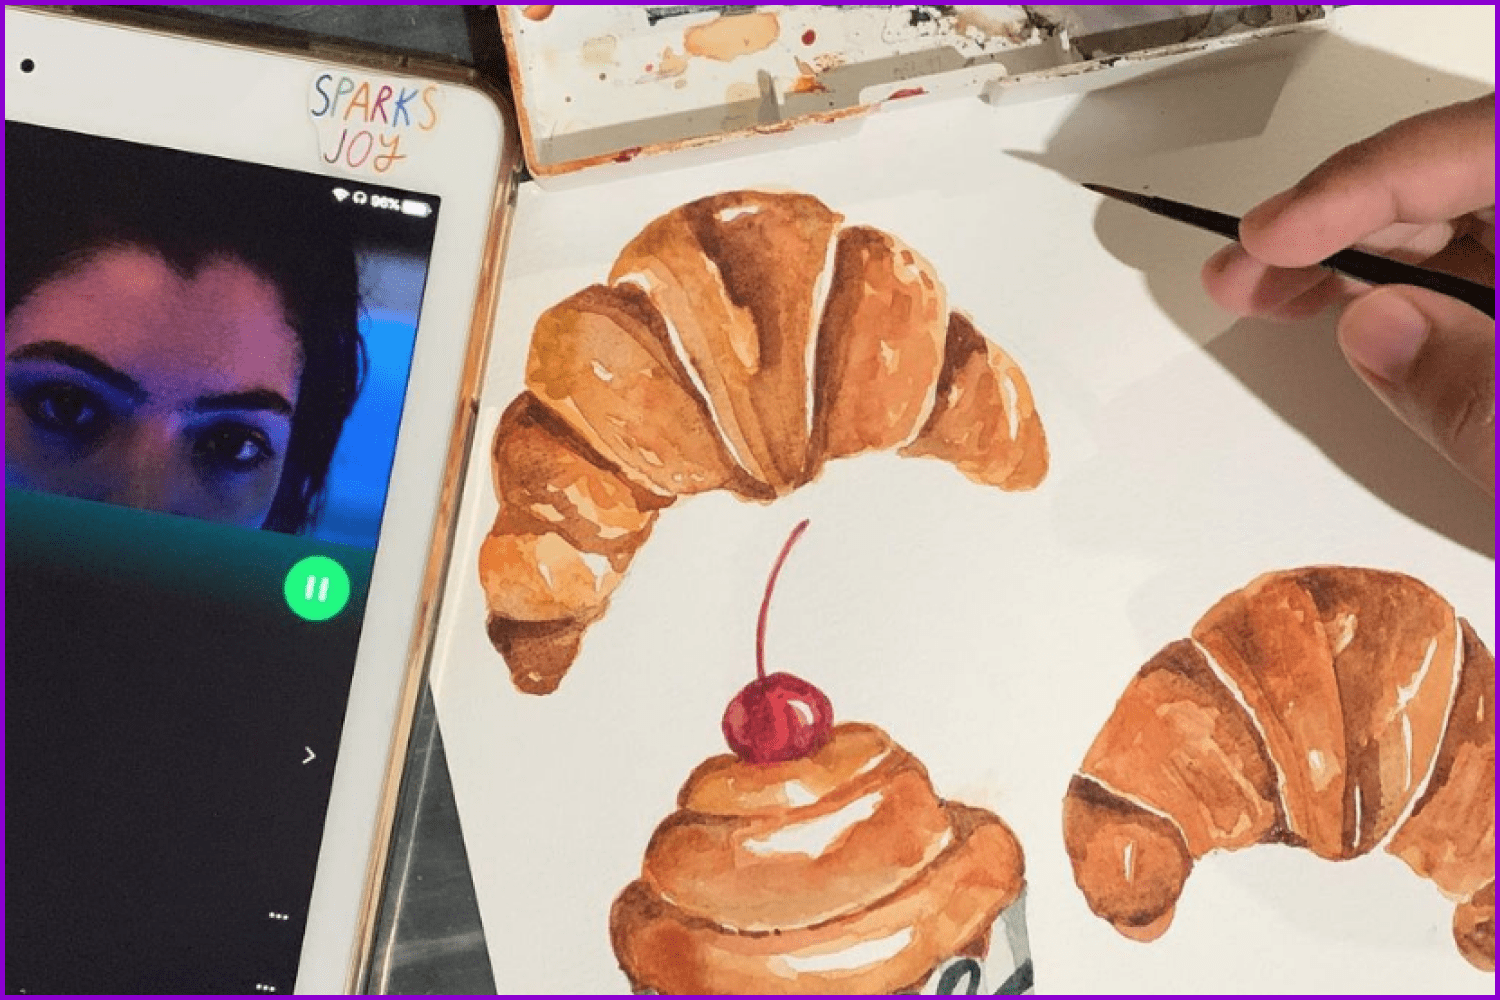 Drawn croissants on a sheet of white paper.